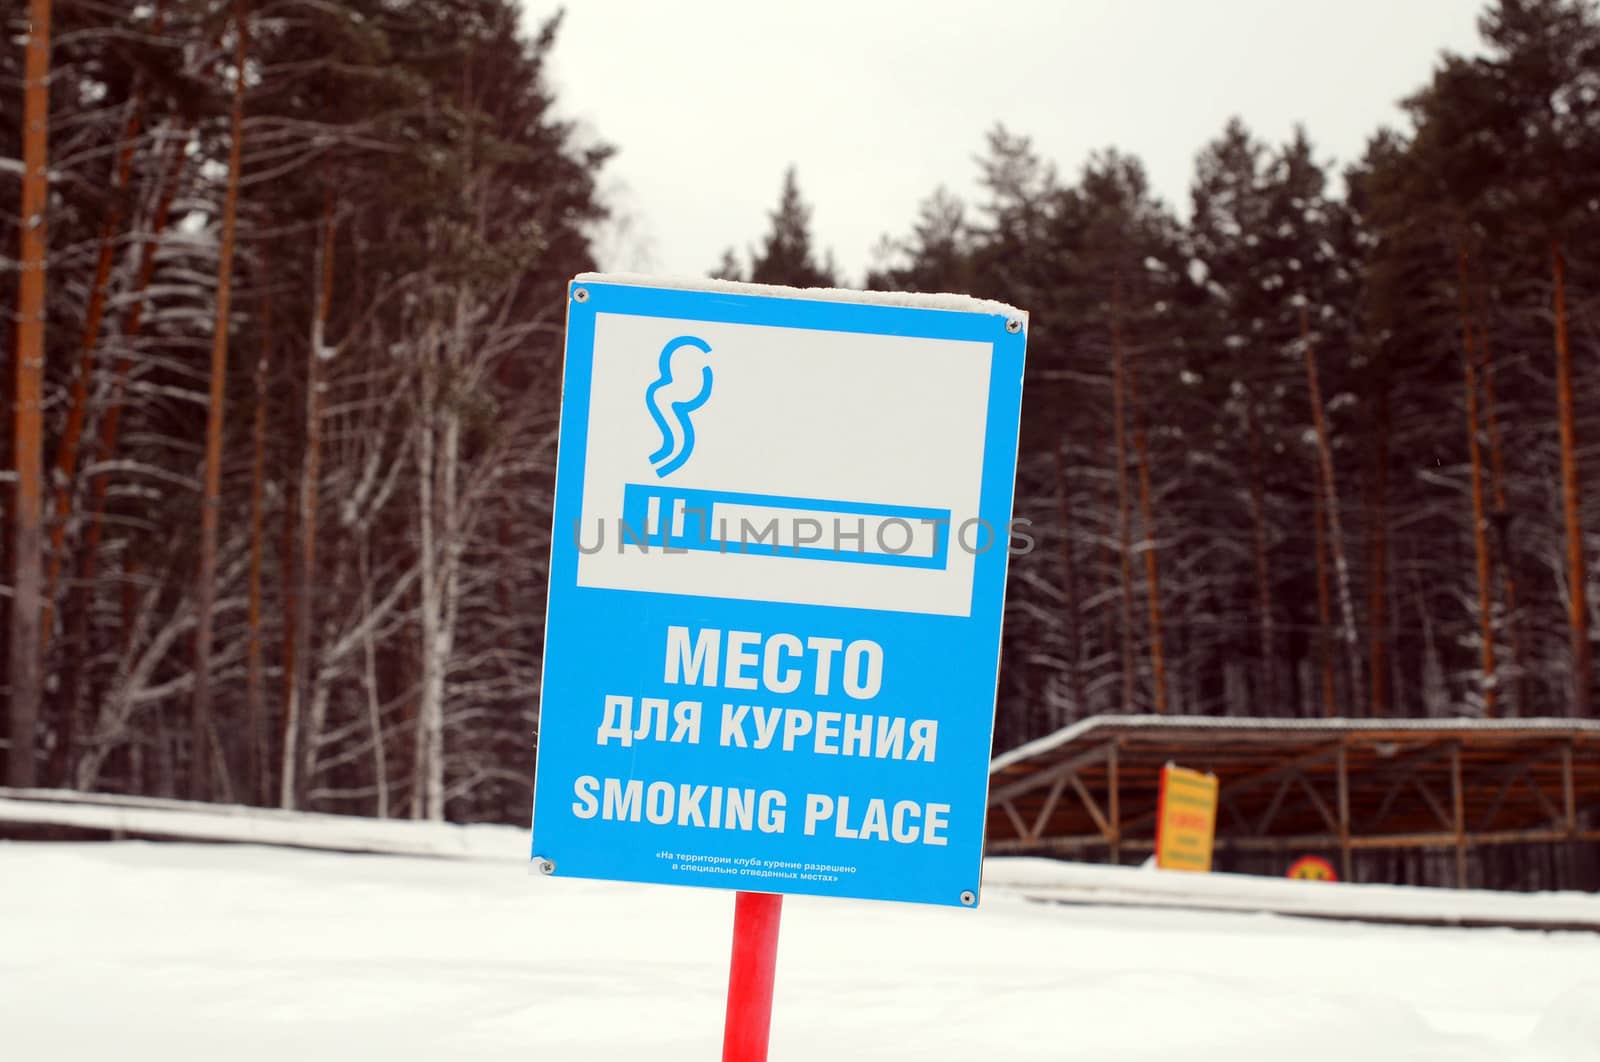 The sign "Smoking area" in country park